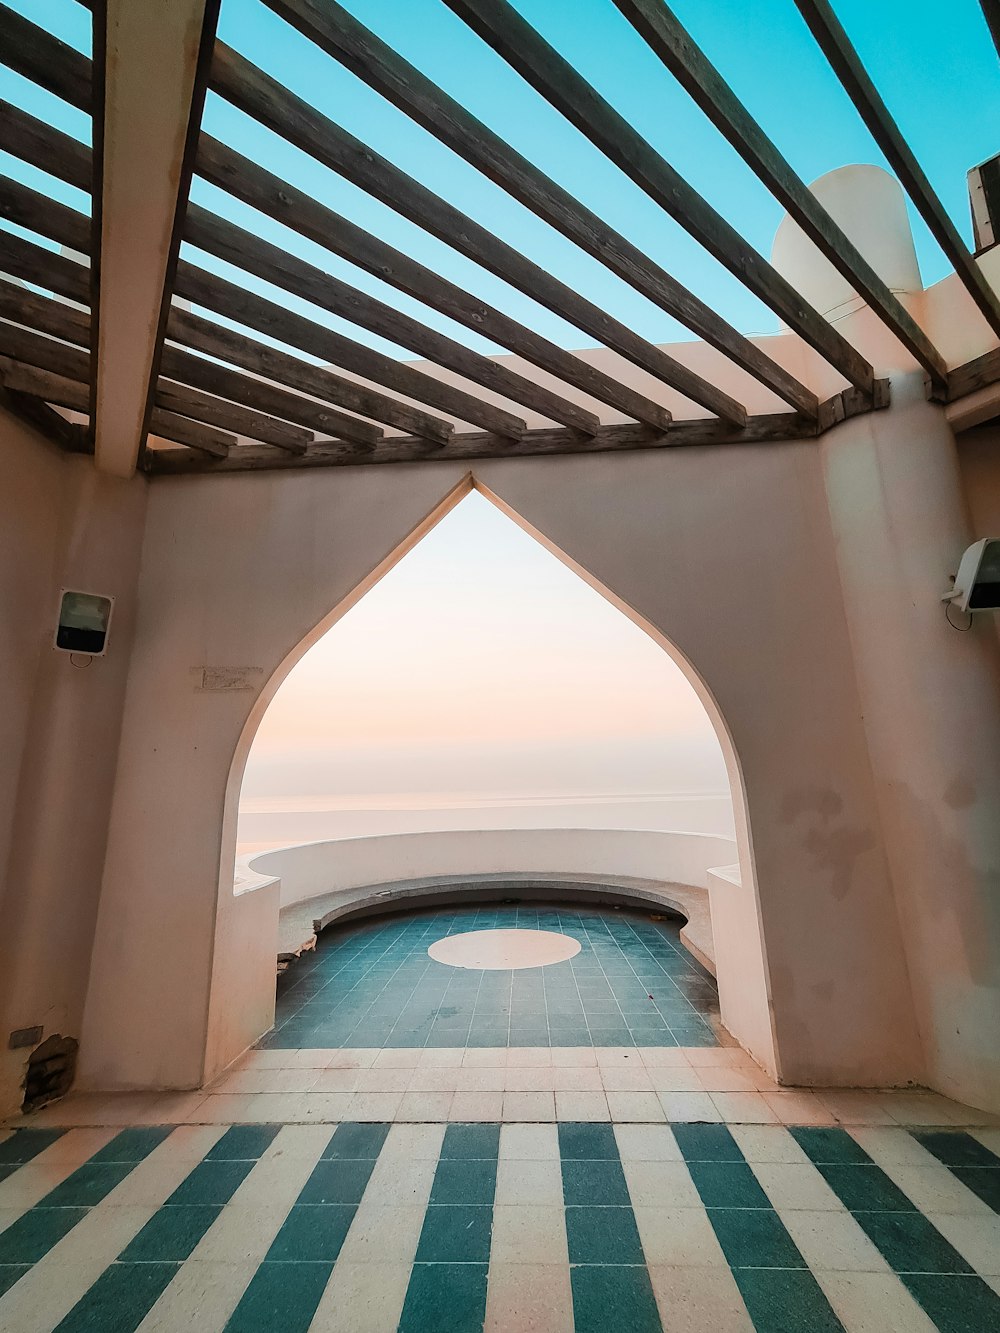 a view of the ocean through an arch in a building